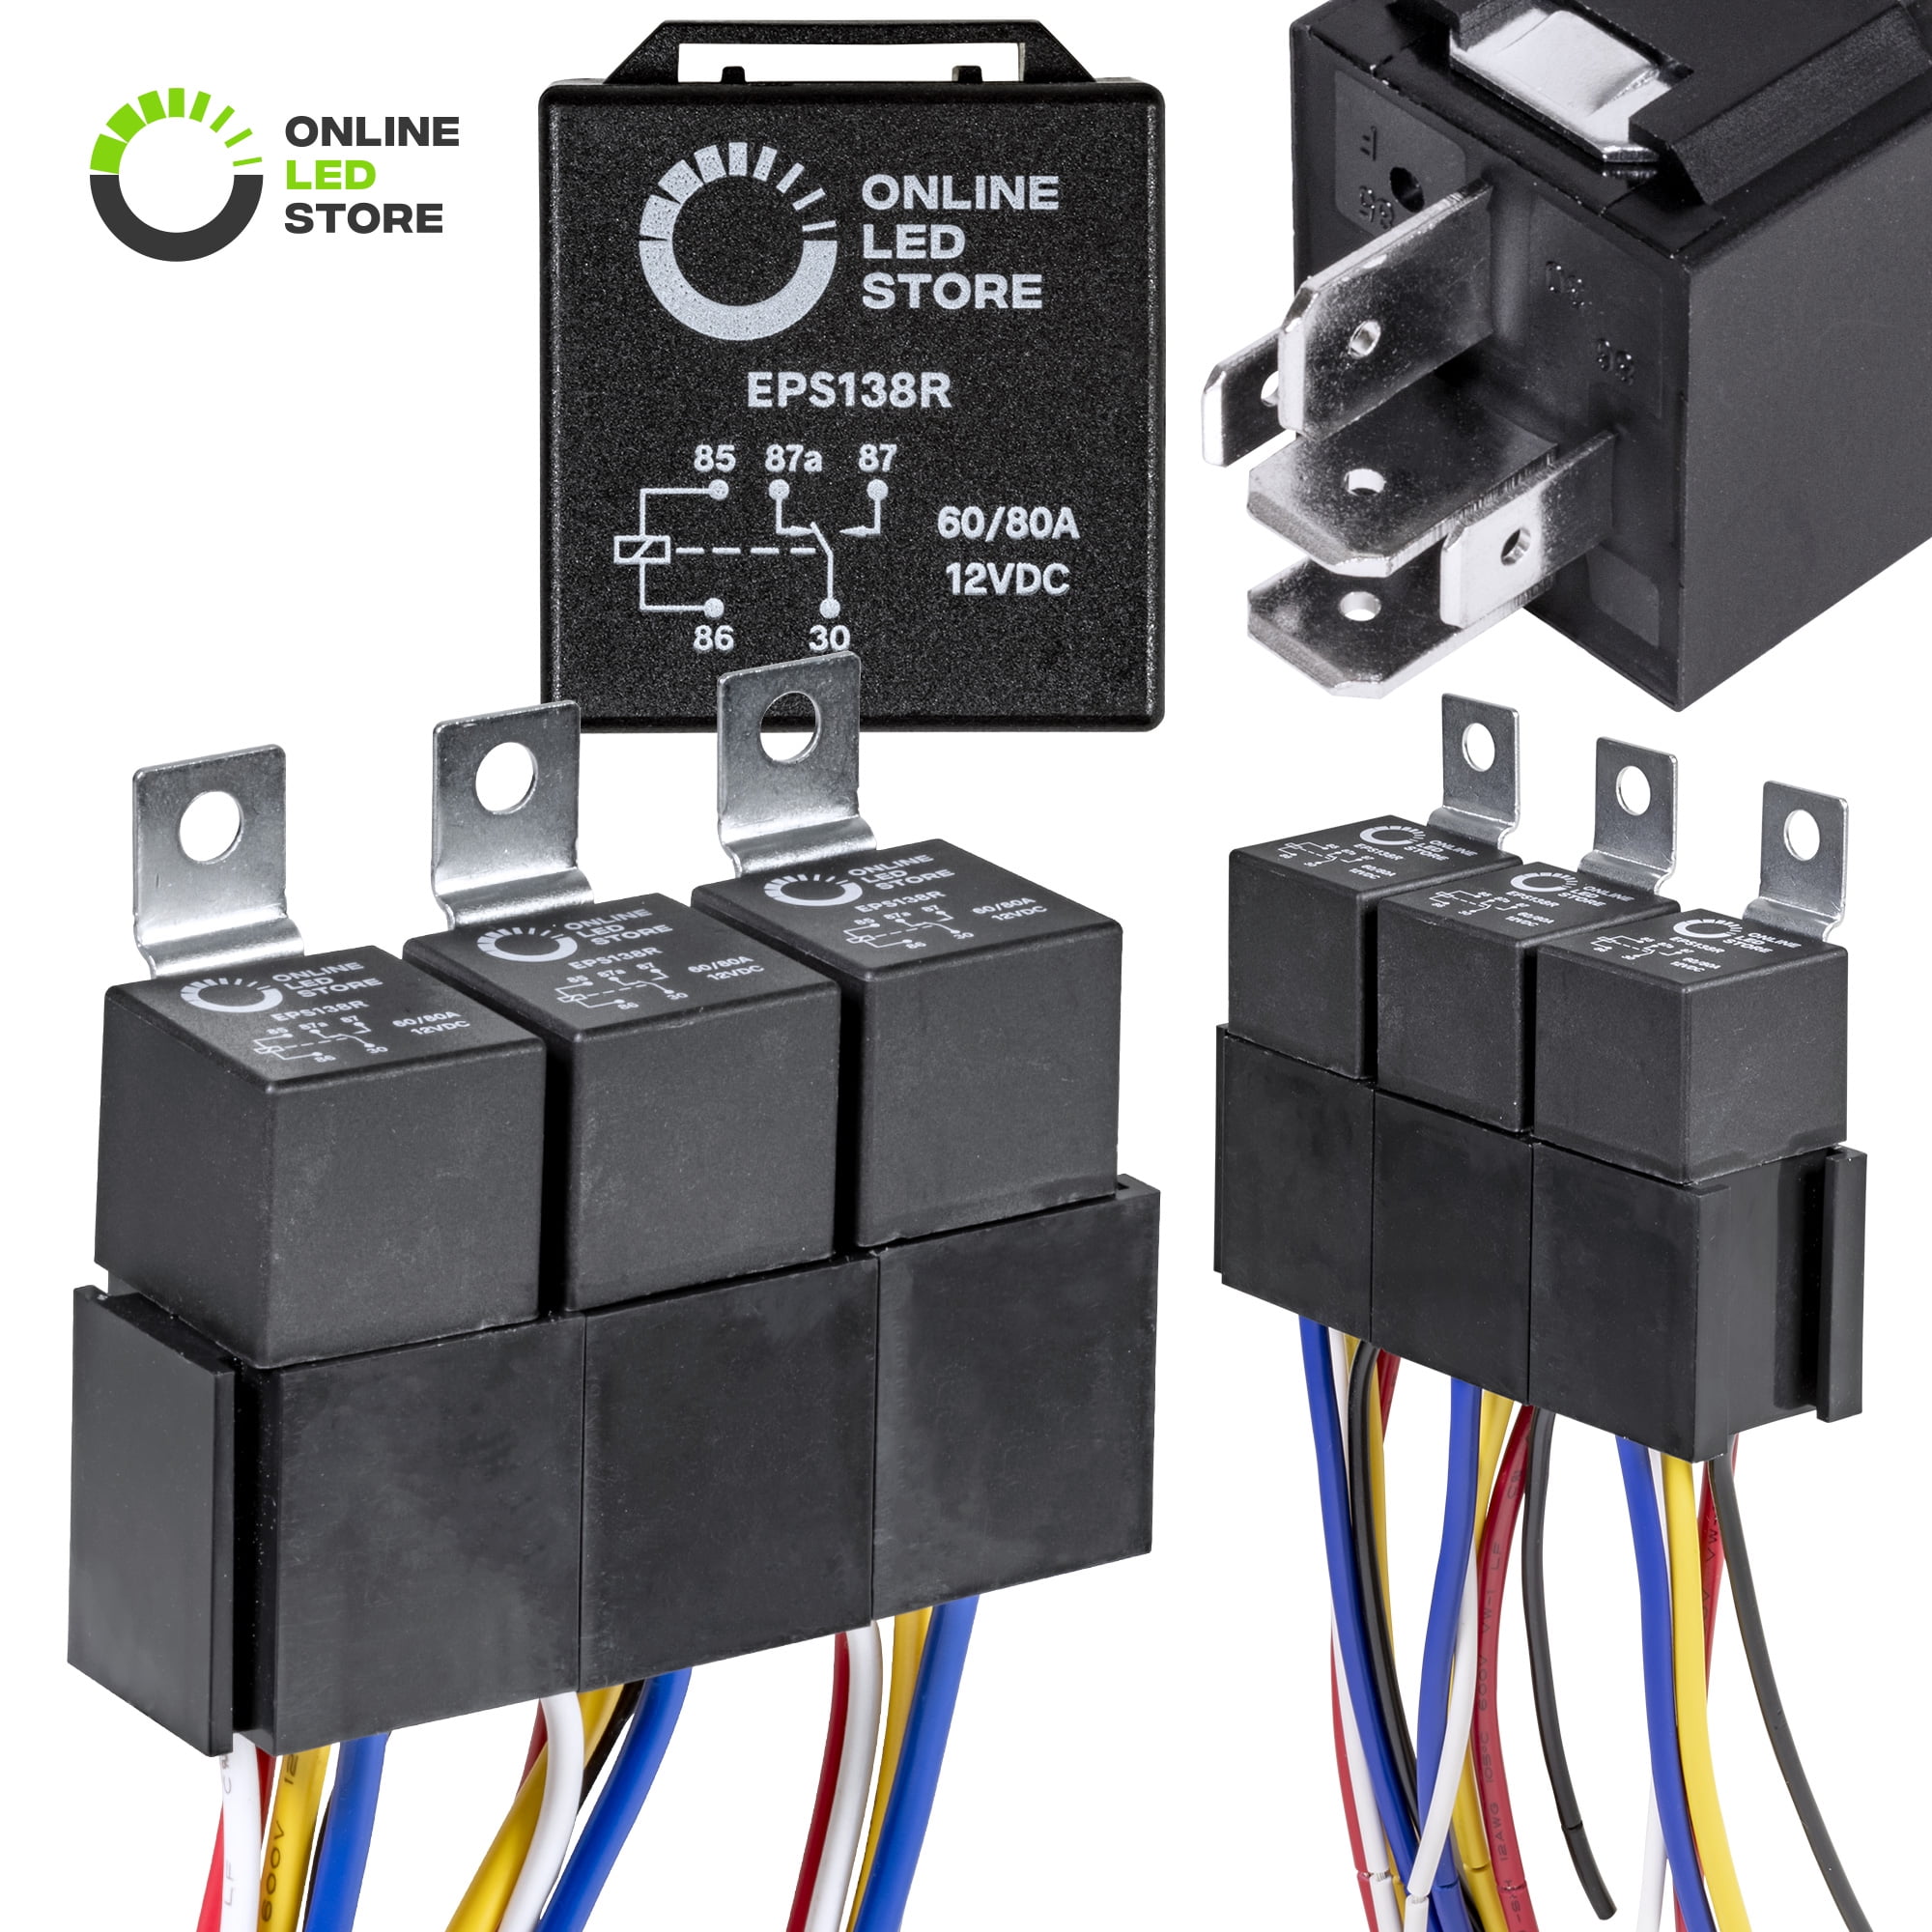 2-PACK 60 AMP RELAY 5-PIN SOCKET 60A AUTOMOTIVE RELAYS CHEVY SBC 305 327 350 383 